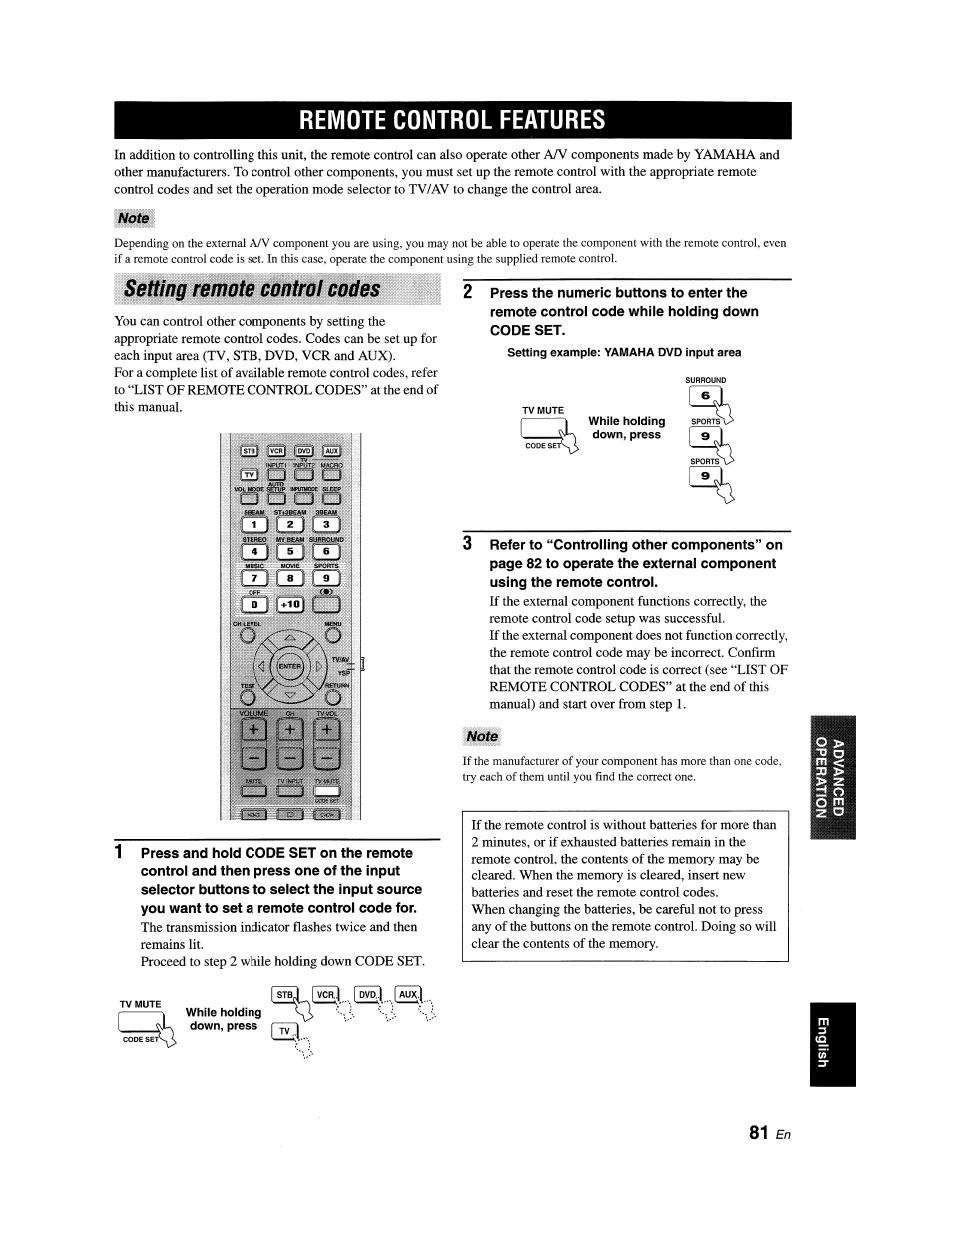 Remote control features, Setting remote control codes | Yamaha YSP-1100 User Manual | Page 85 / 104